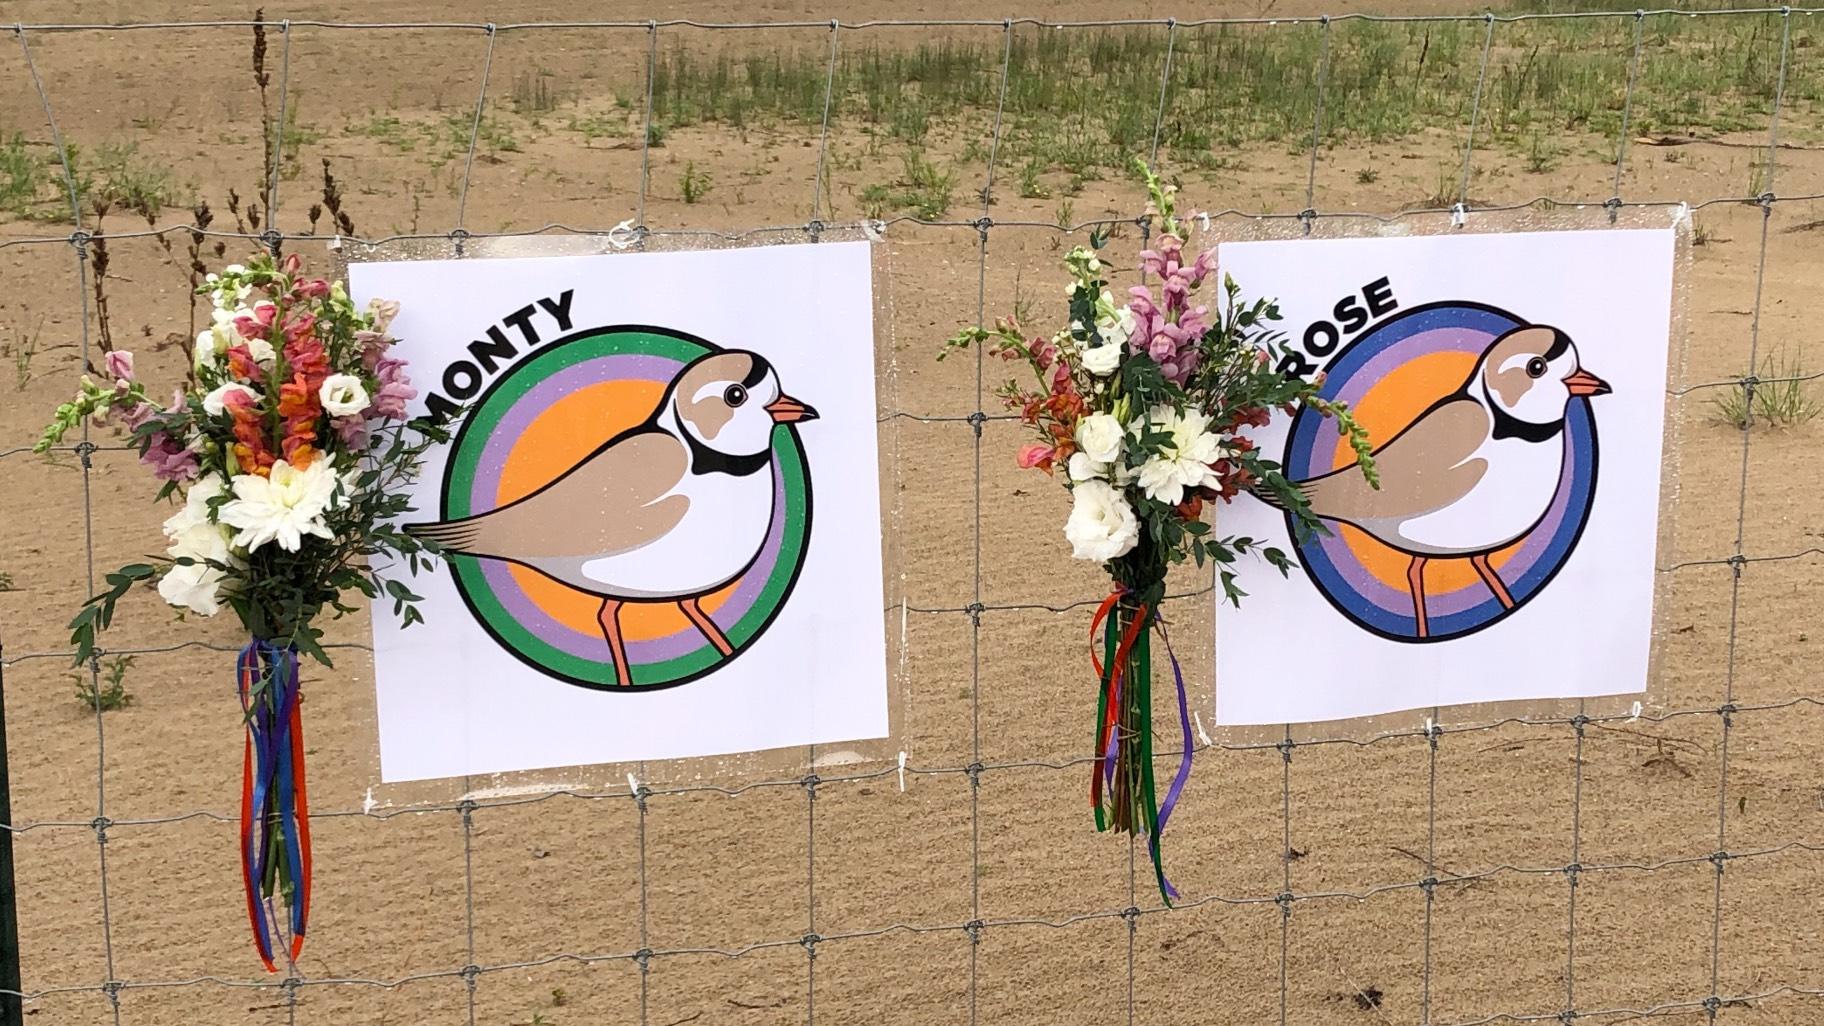 A memorial for Monty and Rose, held in 2022, at the site now named in their honor. (Patty Wetli / WTTW News)